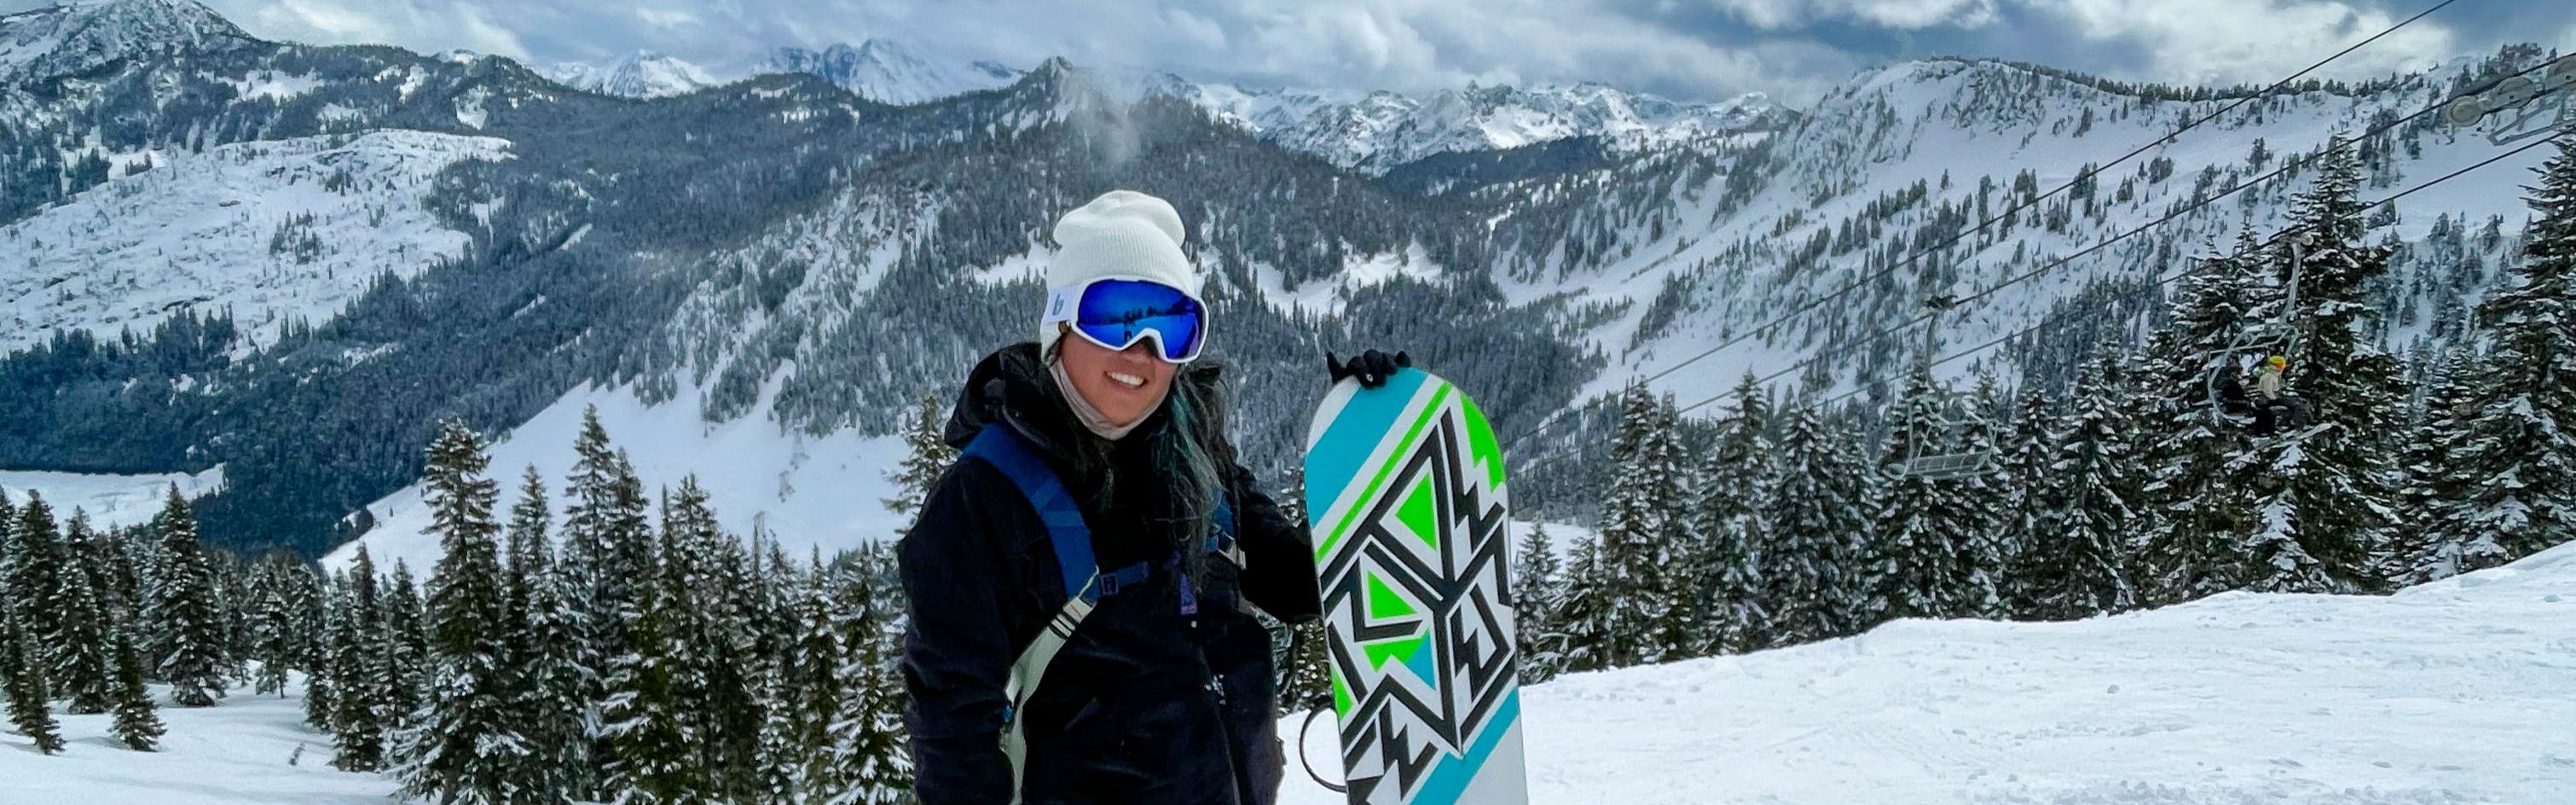 A woman stands holding her snowboard and smiles for the camera. Snowy, tree-covered mountains ruse behind her. 